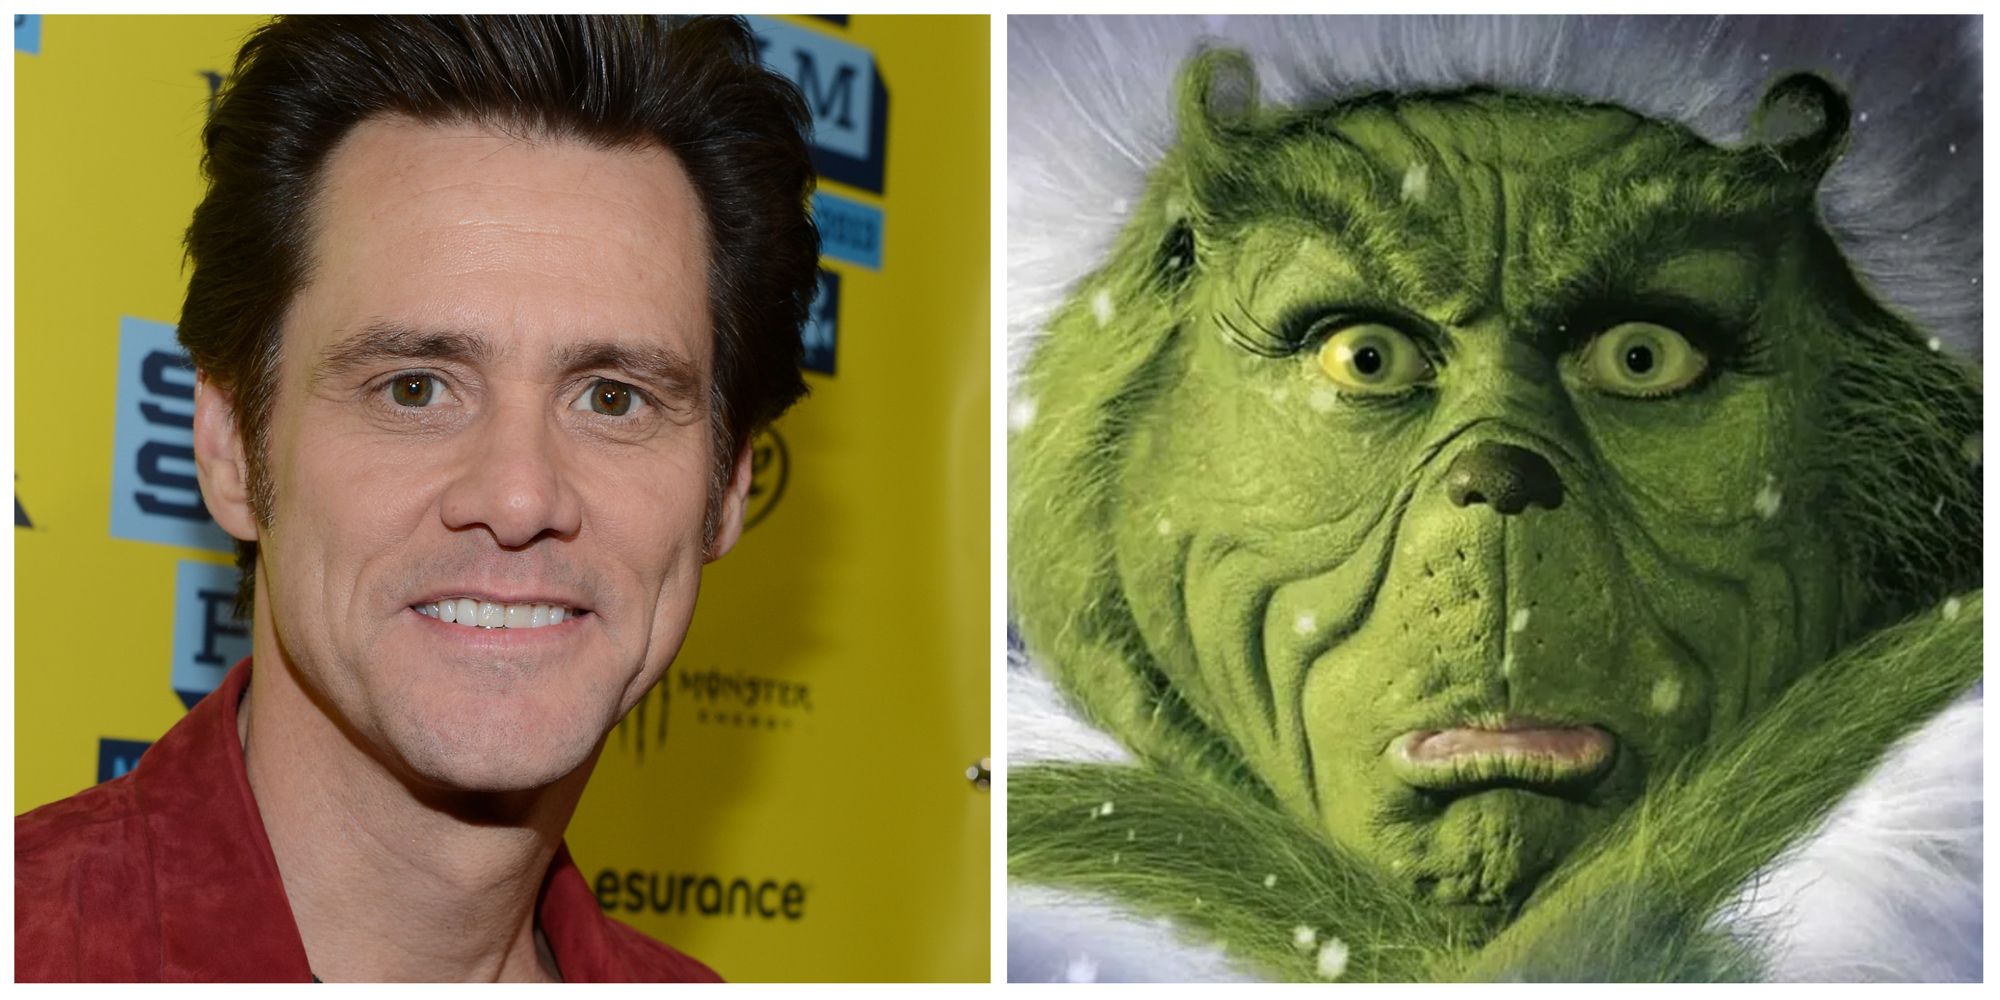 Jim Carrey as The Grinch in How the Grinch Stole Christmas.